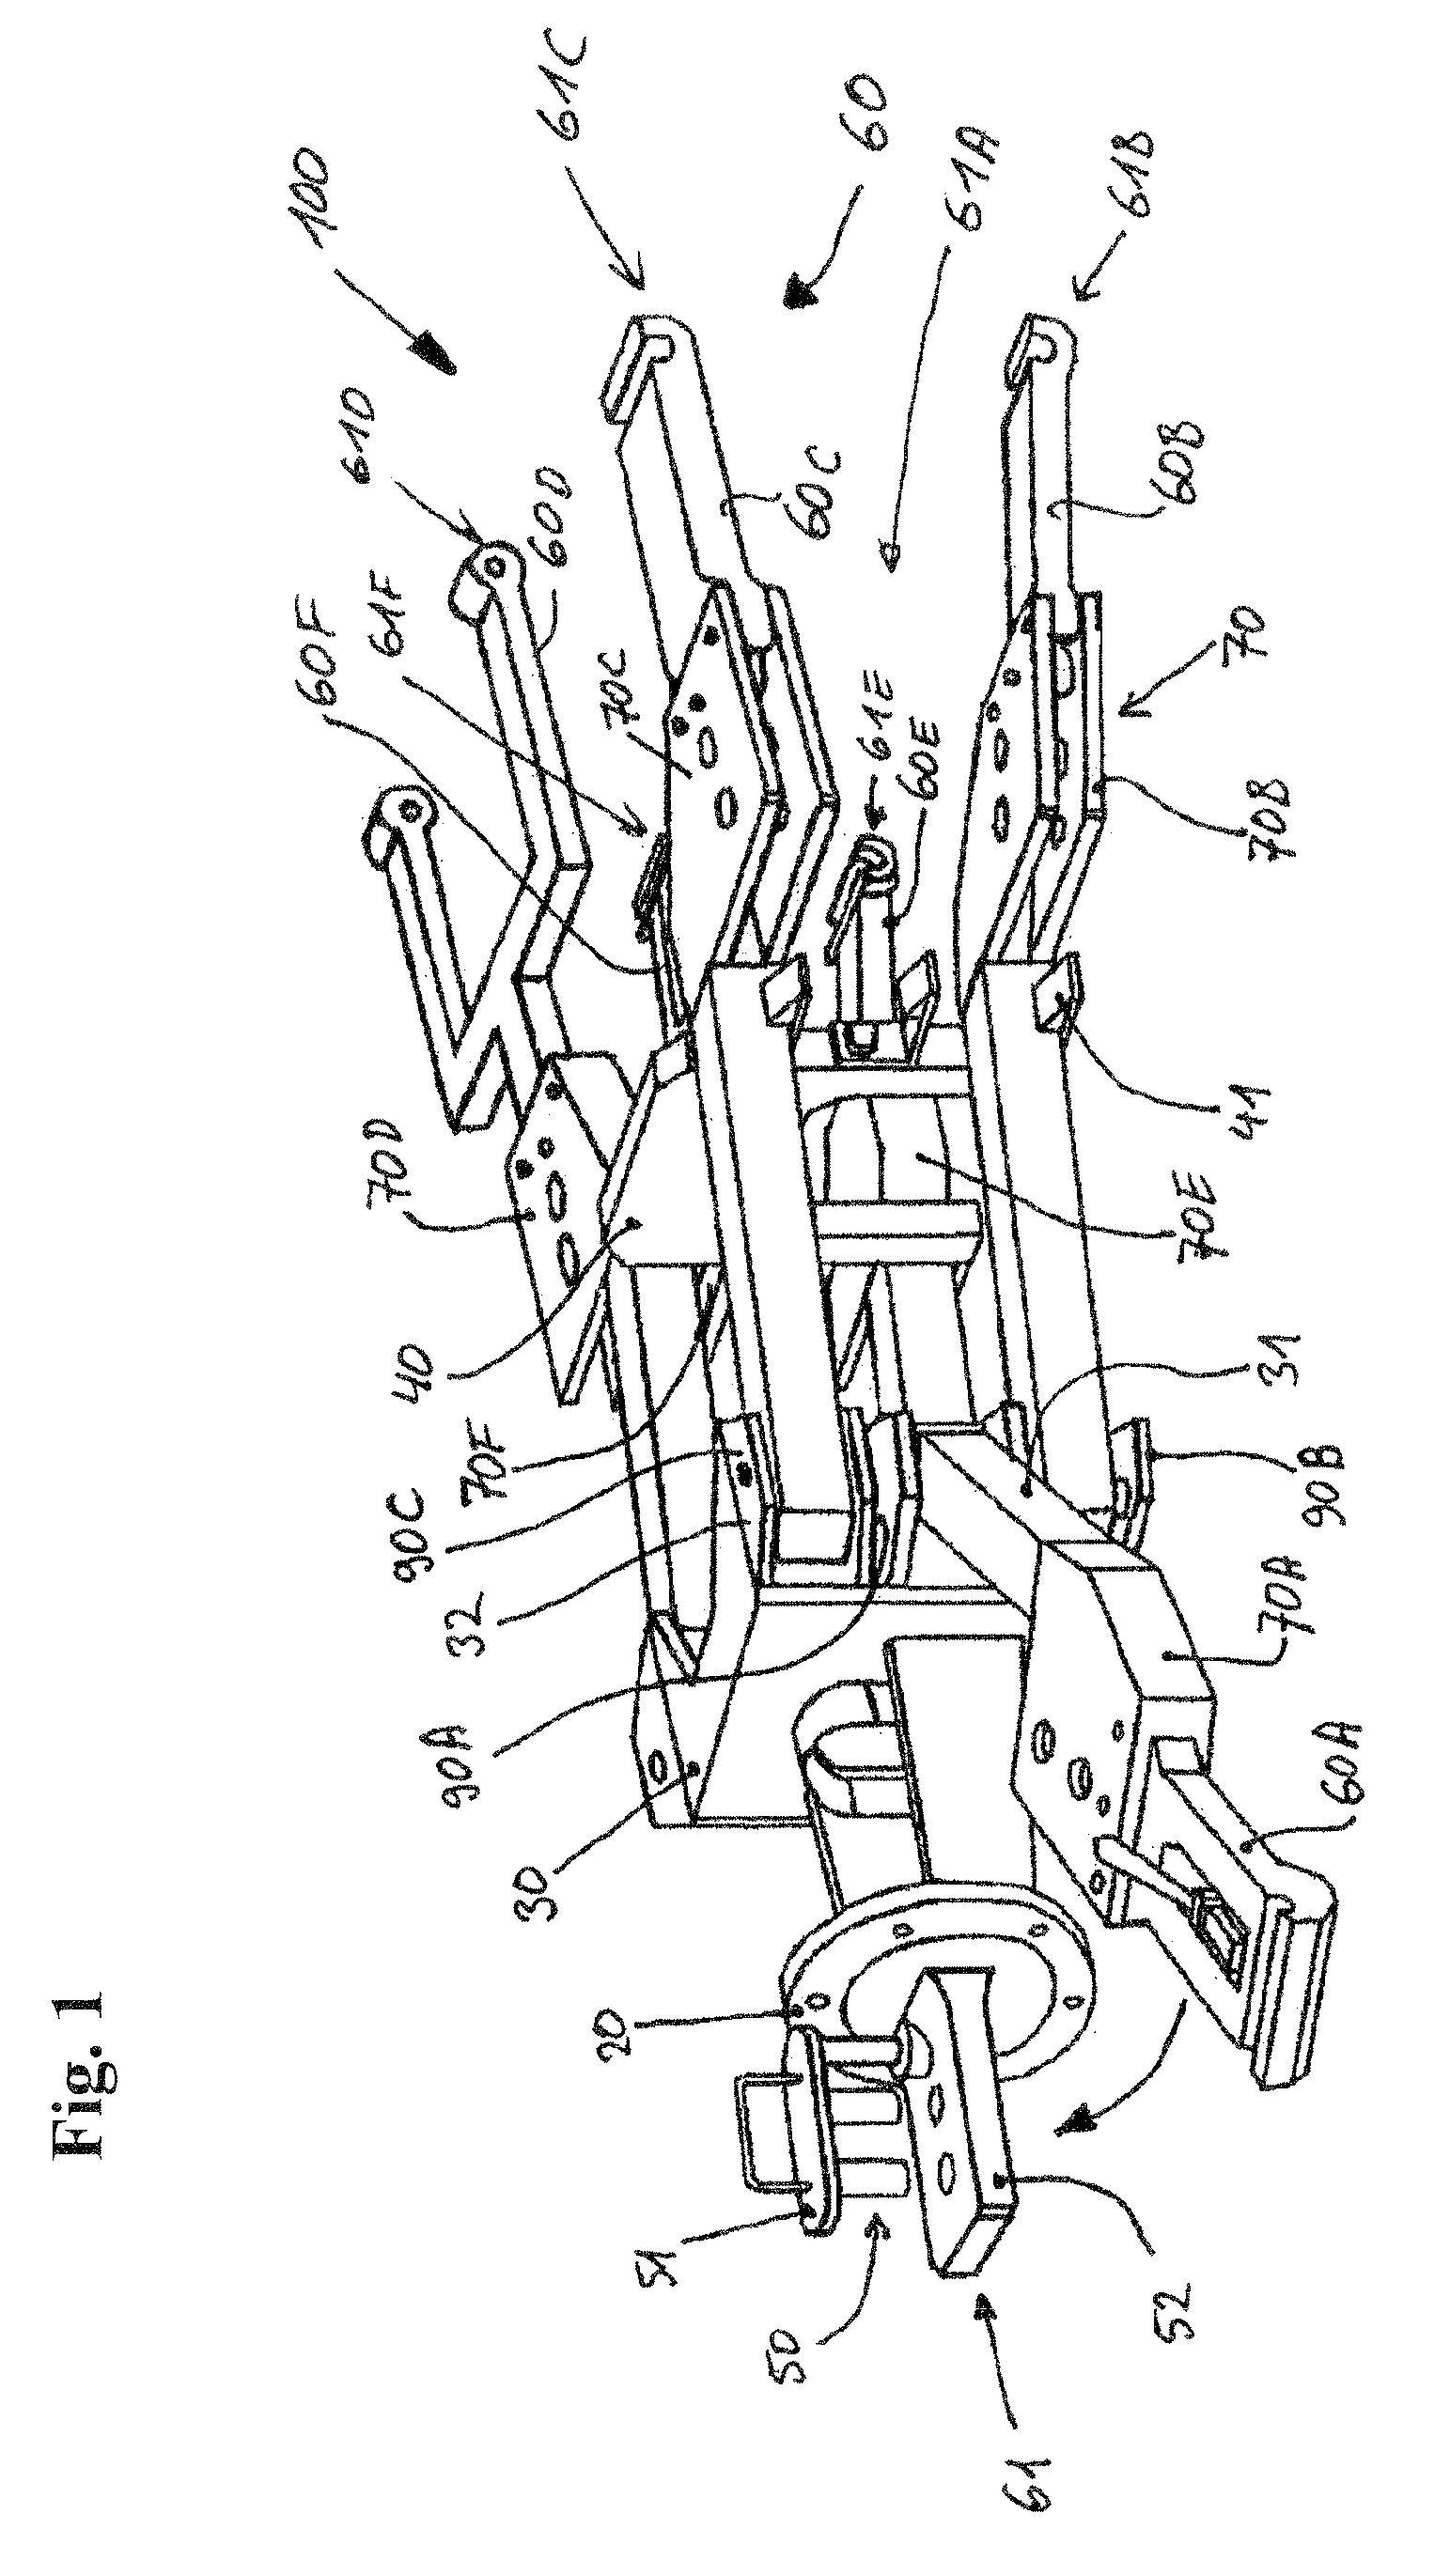 Coupling device for different landing gears of aircraft